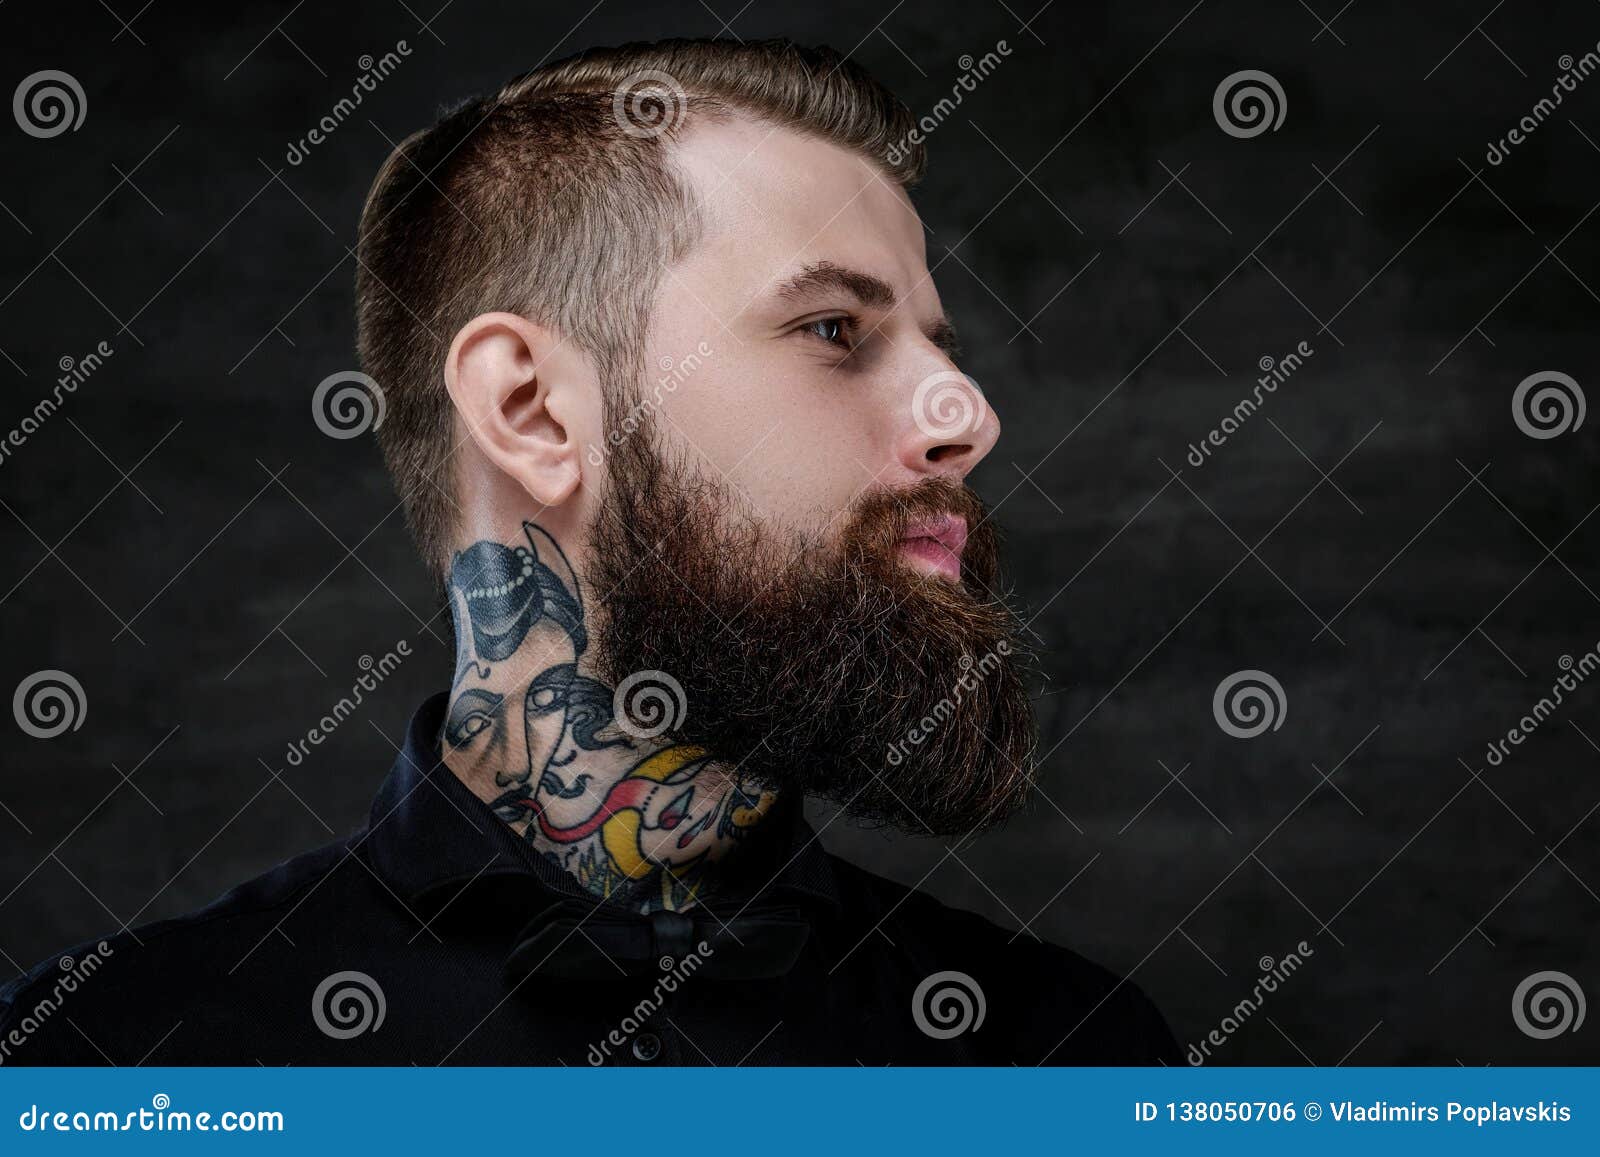 Profile Portrait of an Expressive Bearded Man with Tattoos on His Neck, on  a Dark Background. Stock Photo - Image of face, facial: 138050706